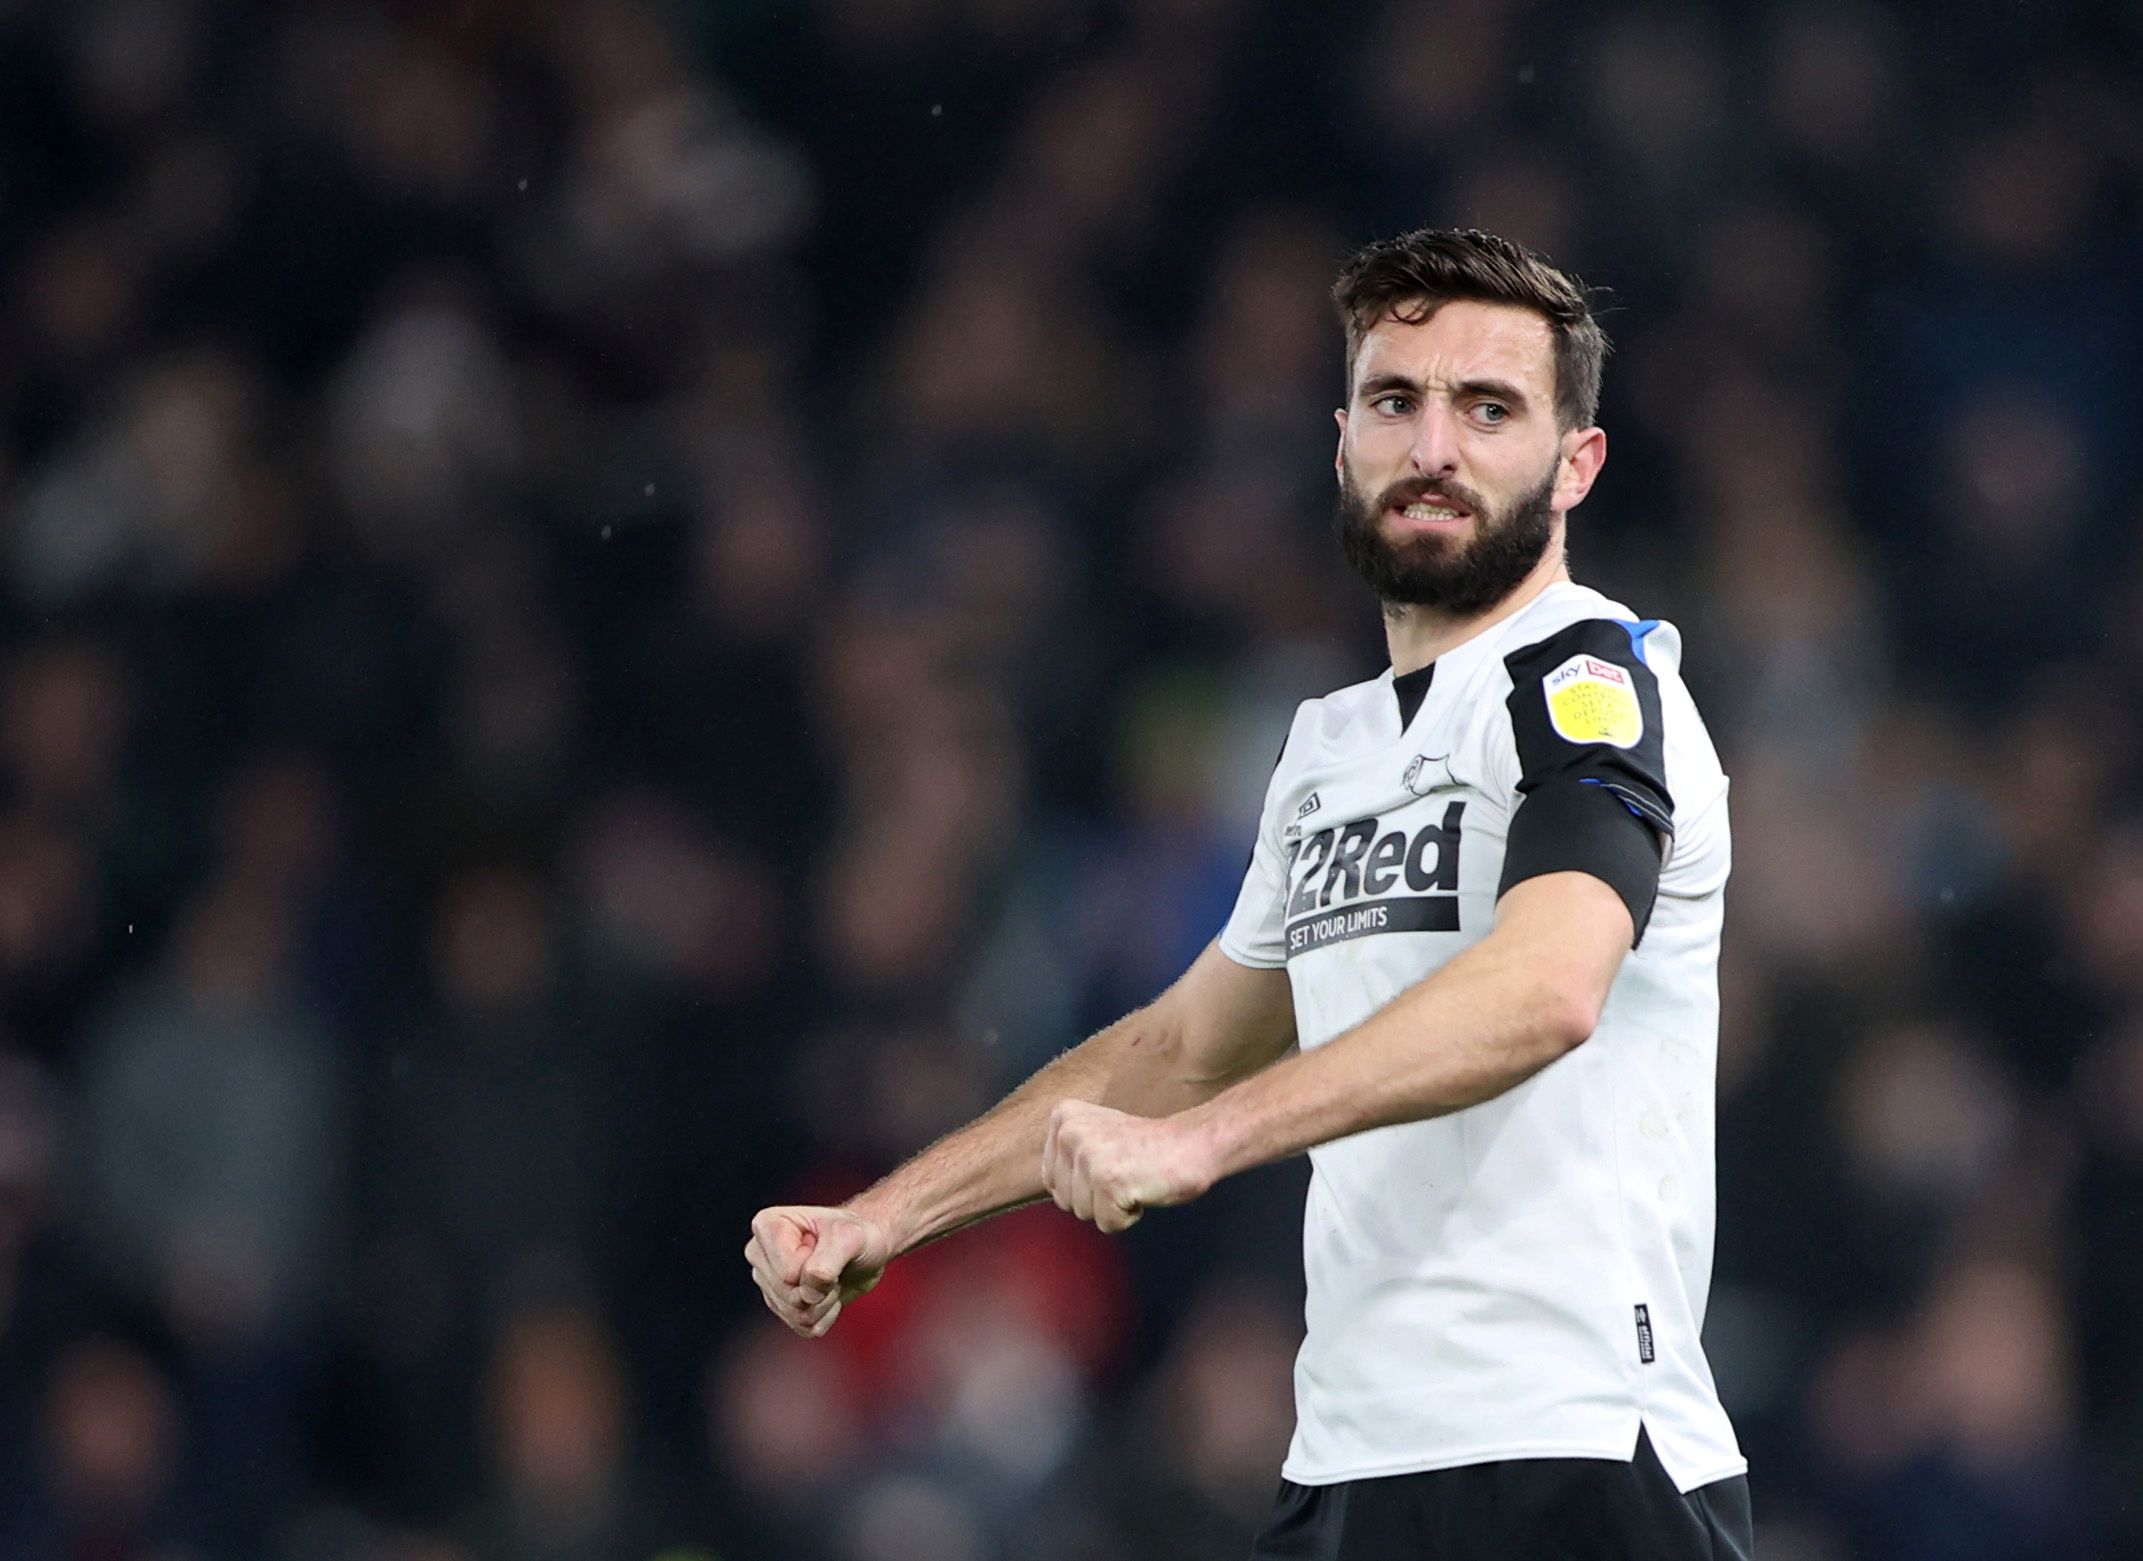 Soccer Football - Championship - Derby County v Blackpool - Pride Park, Derby, Britain - December 11, 2021  Derby County's Graeme Shinnie after the match   Action Images/Molly Darlington  EDITORIAL USE ONLY. No use with unauthorized audio, video, data, fixture lists, club/league logos or 